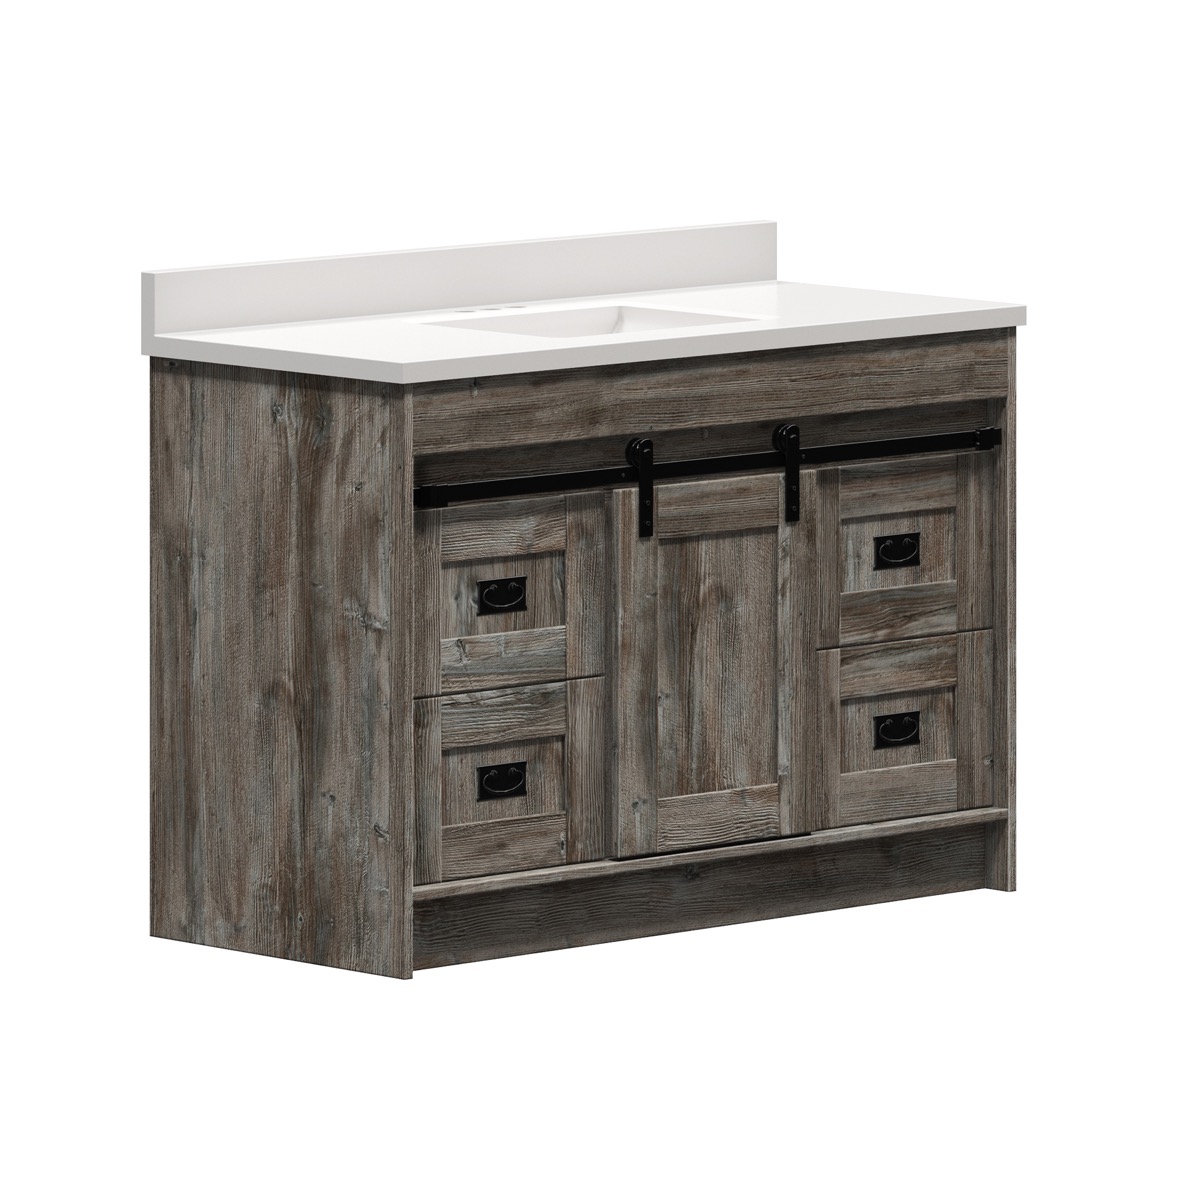 Blackthorn 48 in. W x 21-3/4 in. D Vanity in Driftwood Gray with Cultured Marble Vanity Top in Solid White with White Basin